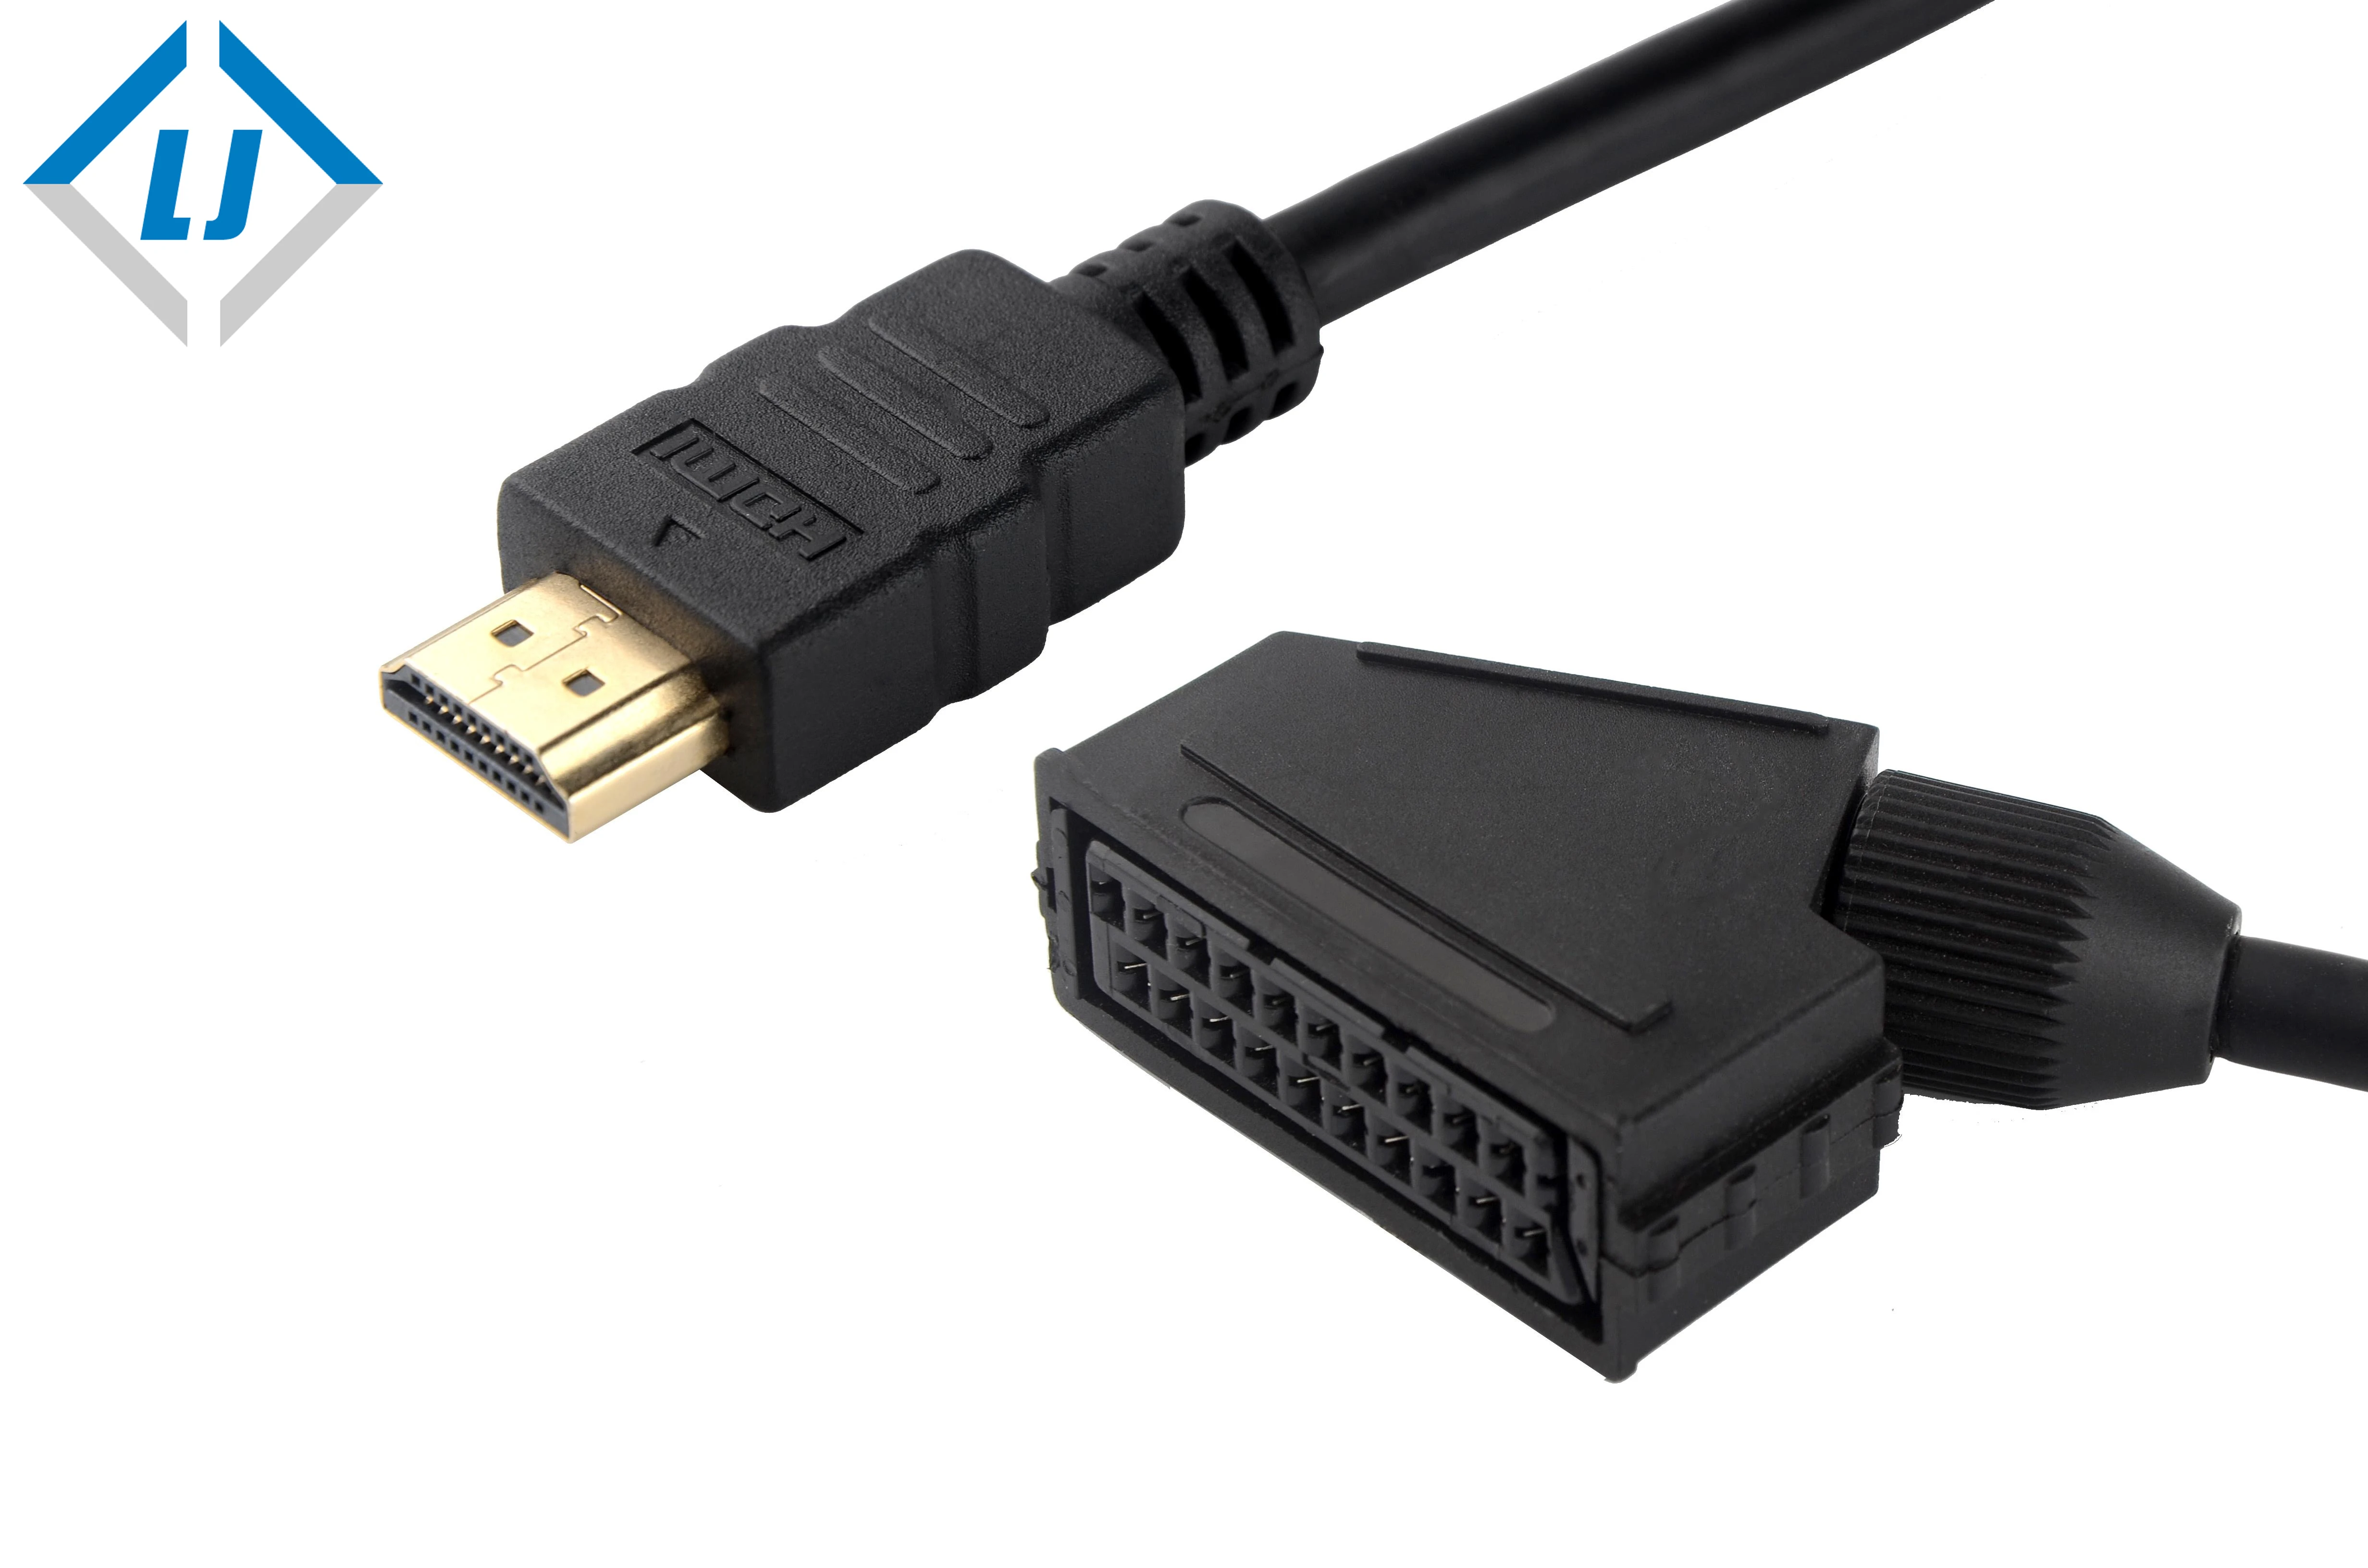 Quality scart female to hdmi male cable for Devices 